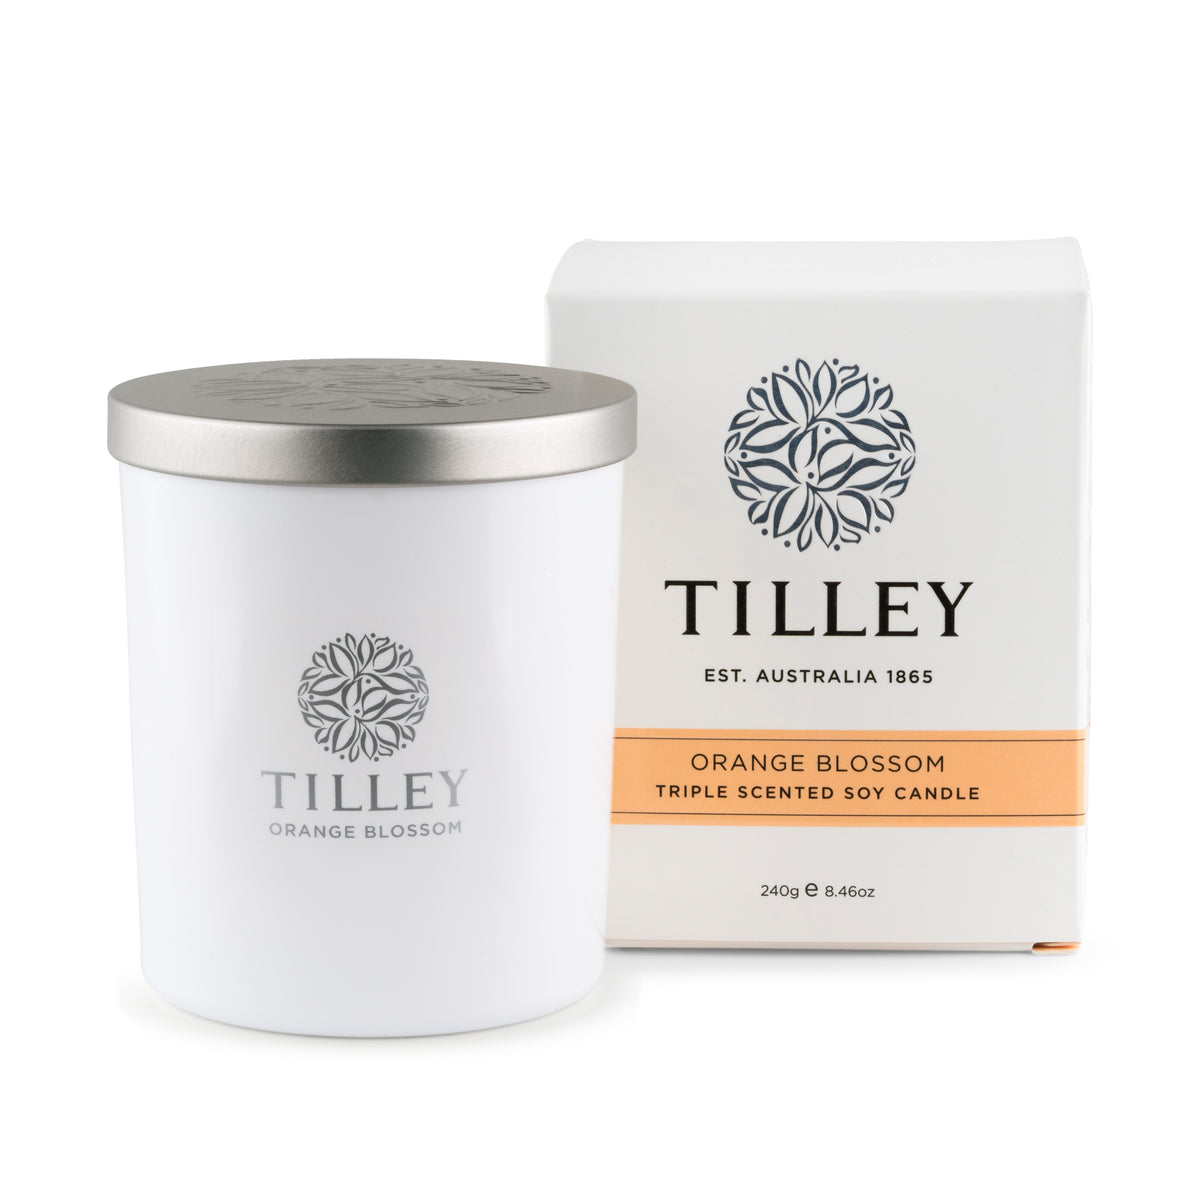 Orange Blossom Soy Candle 240g / 45 Hour